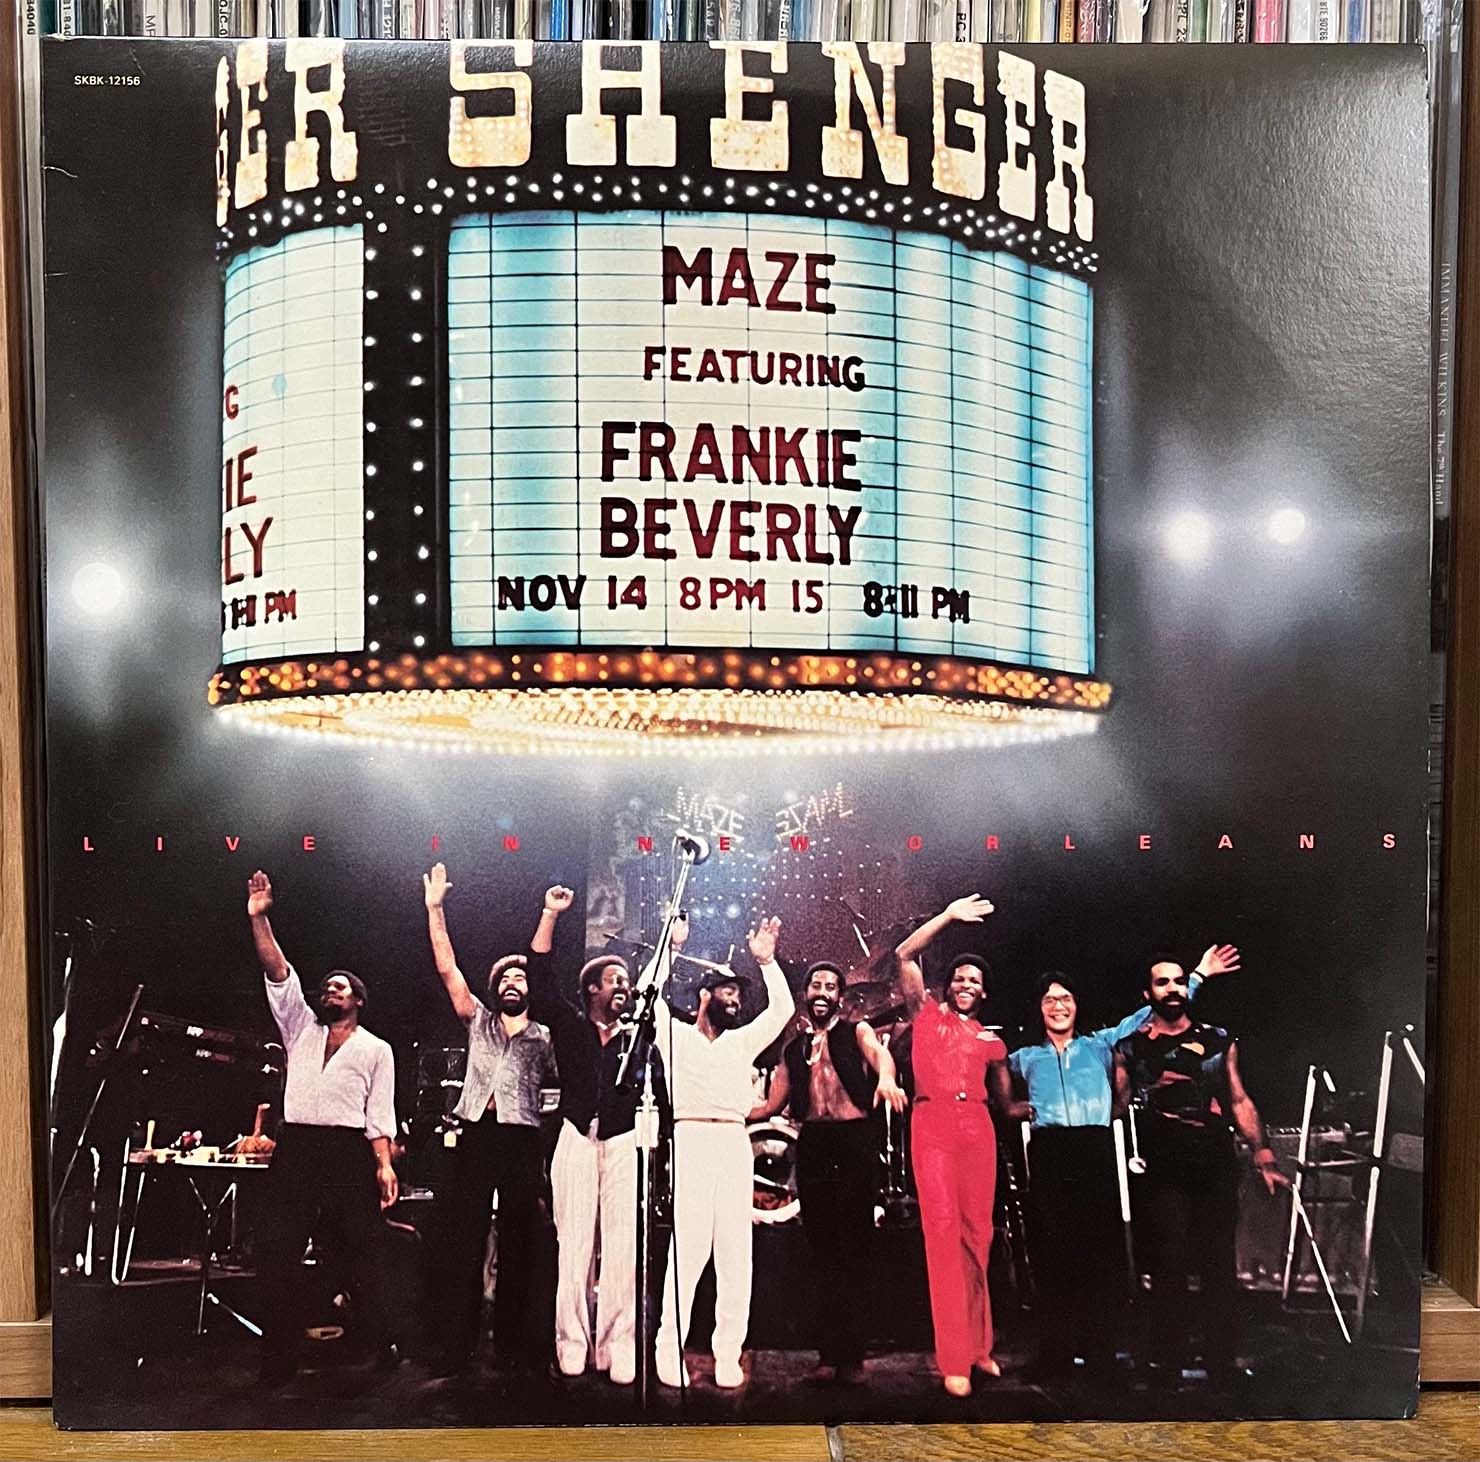 You / Maze featuring Frankie Beverly